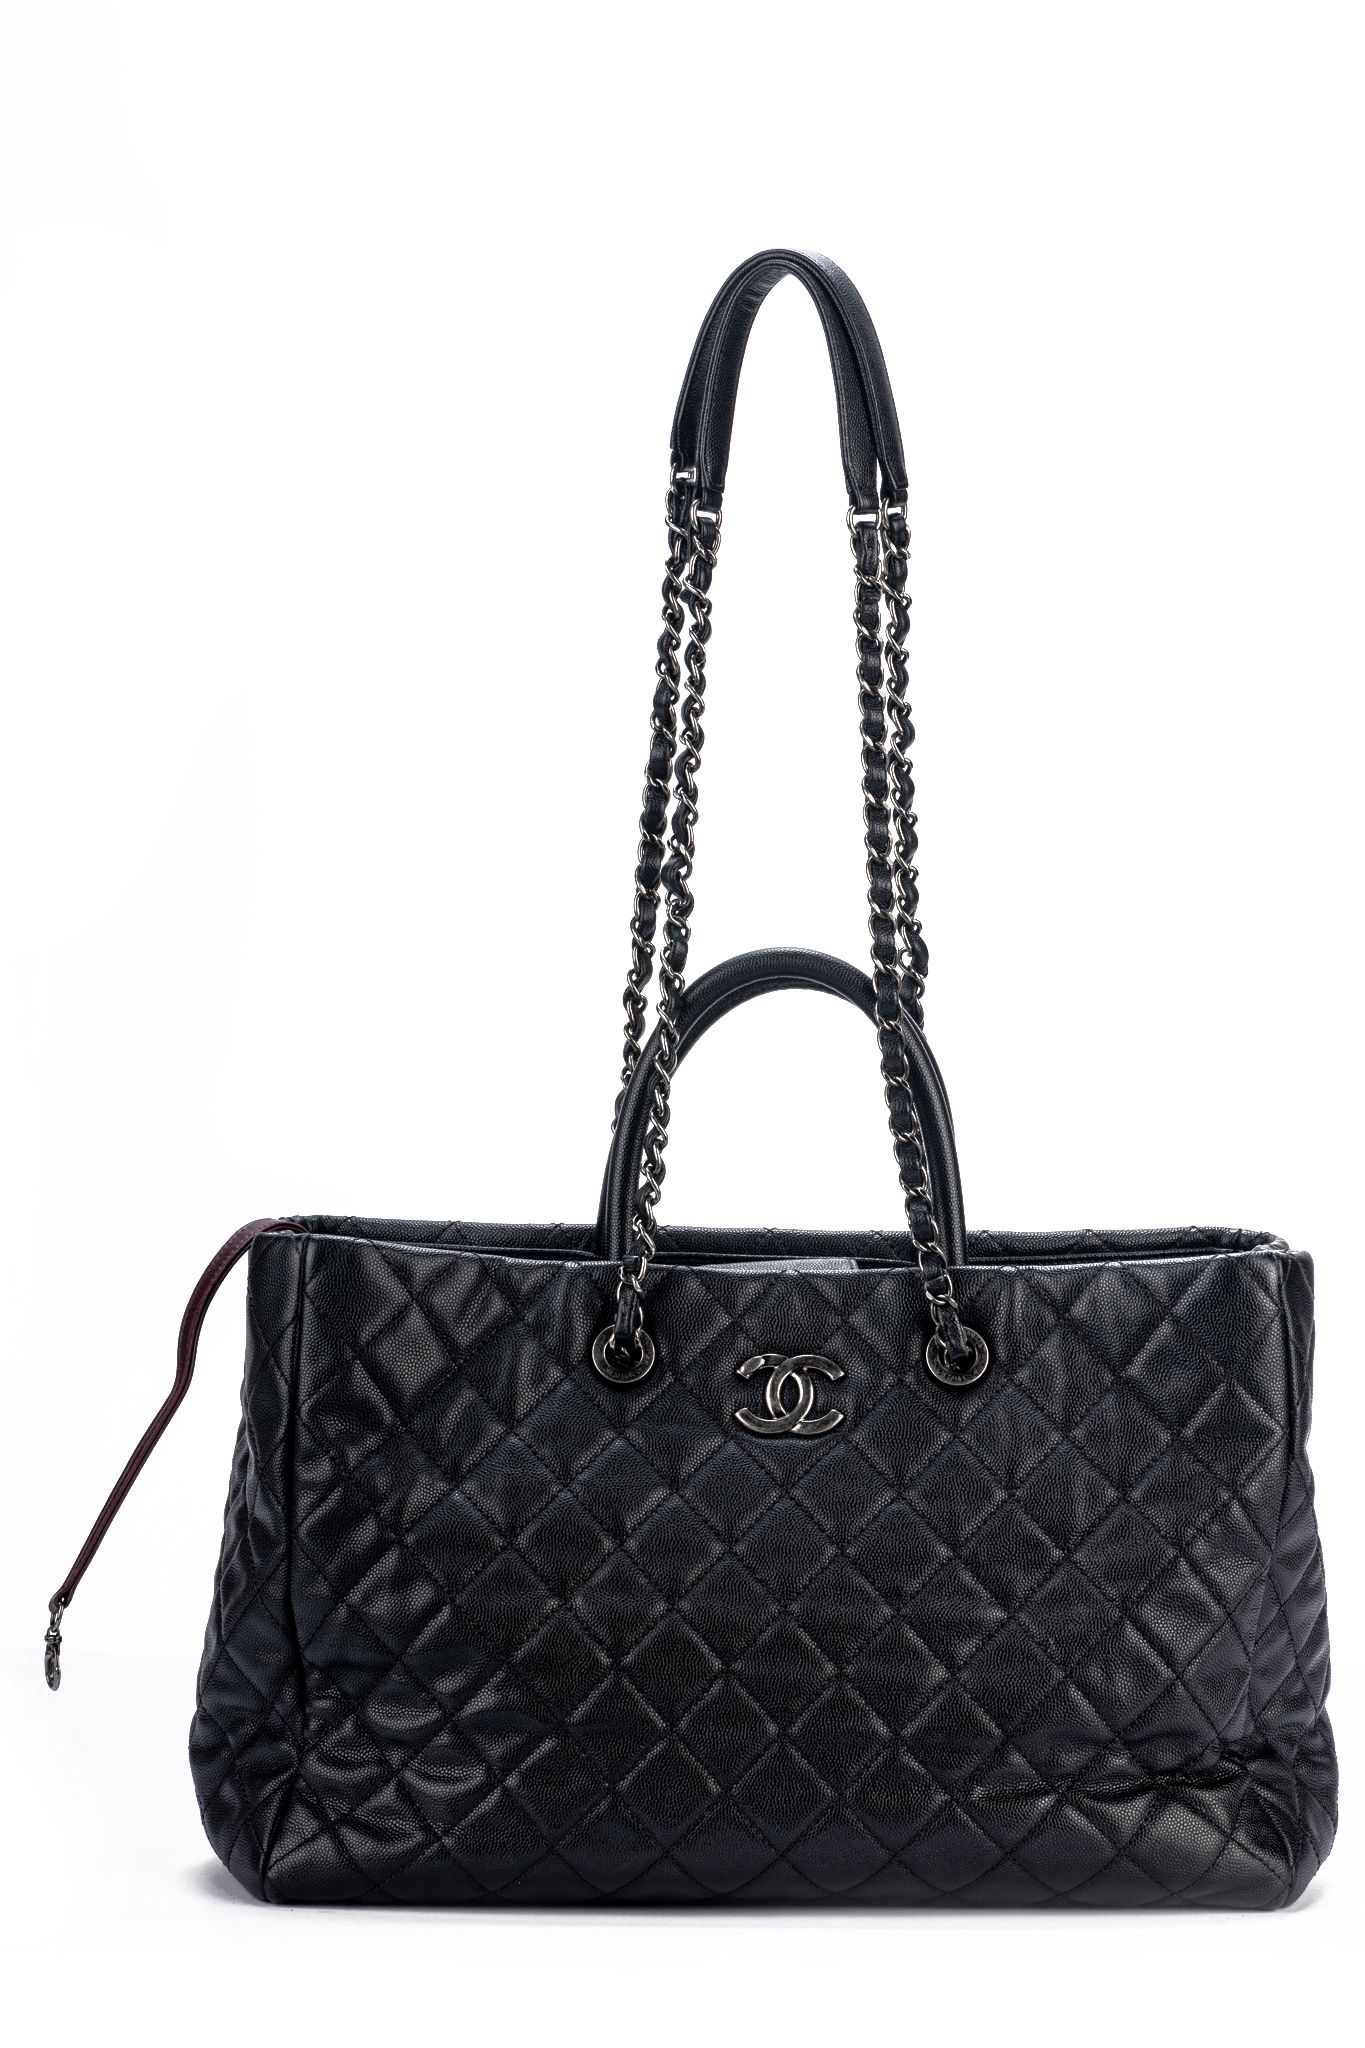 Chanel Large Coco Luxe Shopping Tote